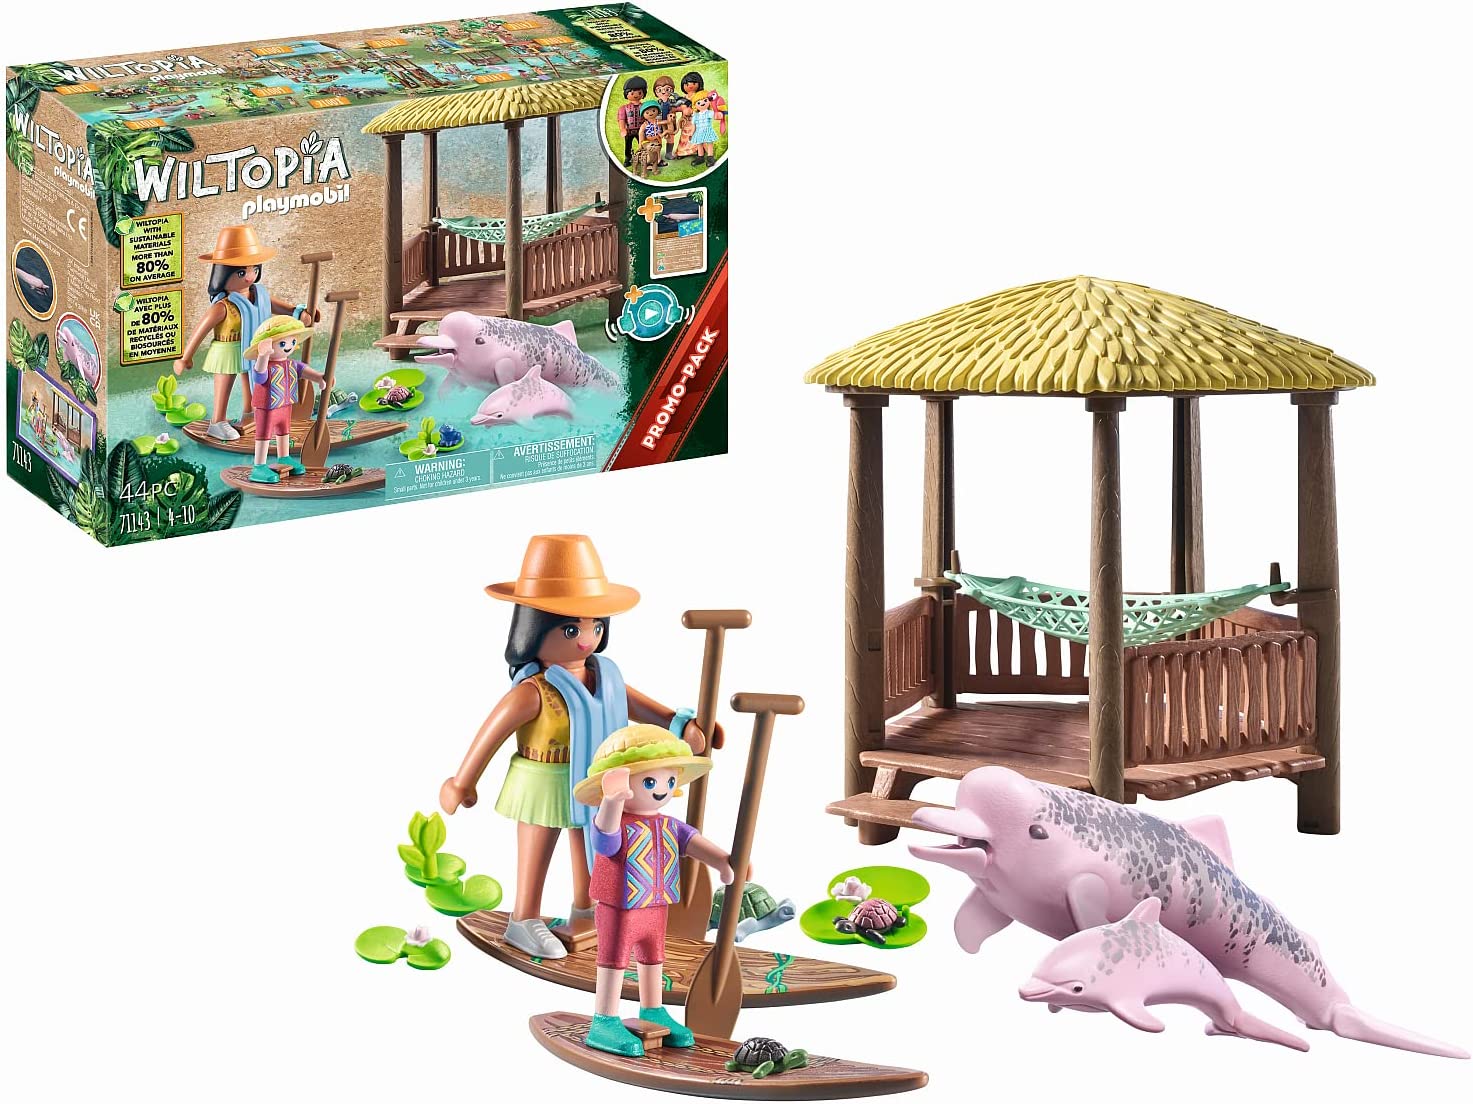 Playmobil Wiltopia 71143 Paddle Tour With River Dolphins, including Beach Hut with Hammock, Wildlife Expedition for Little Hobby Explorers, Sustainable Toy for Children from 4 Years